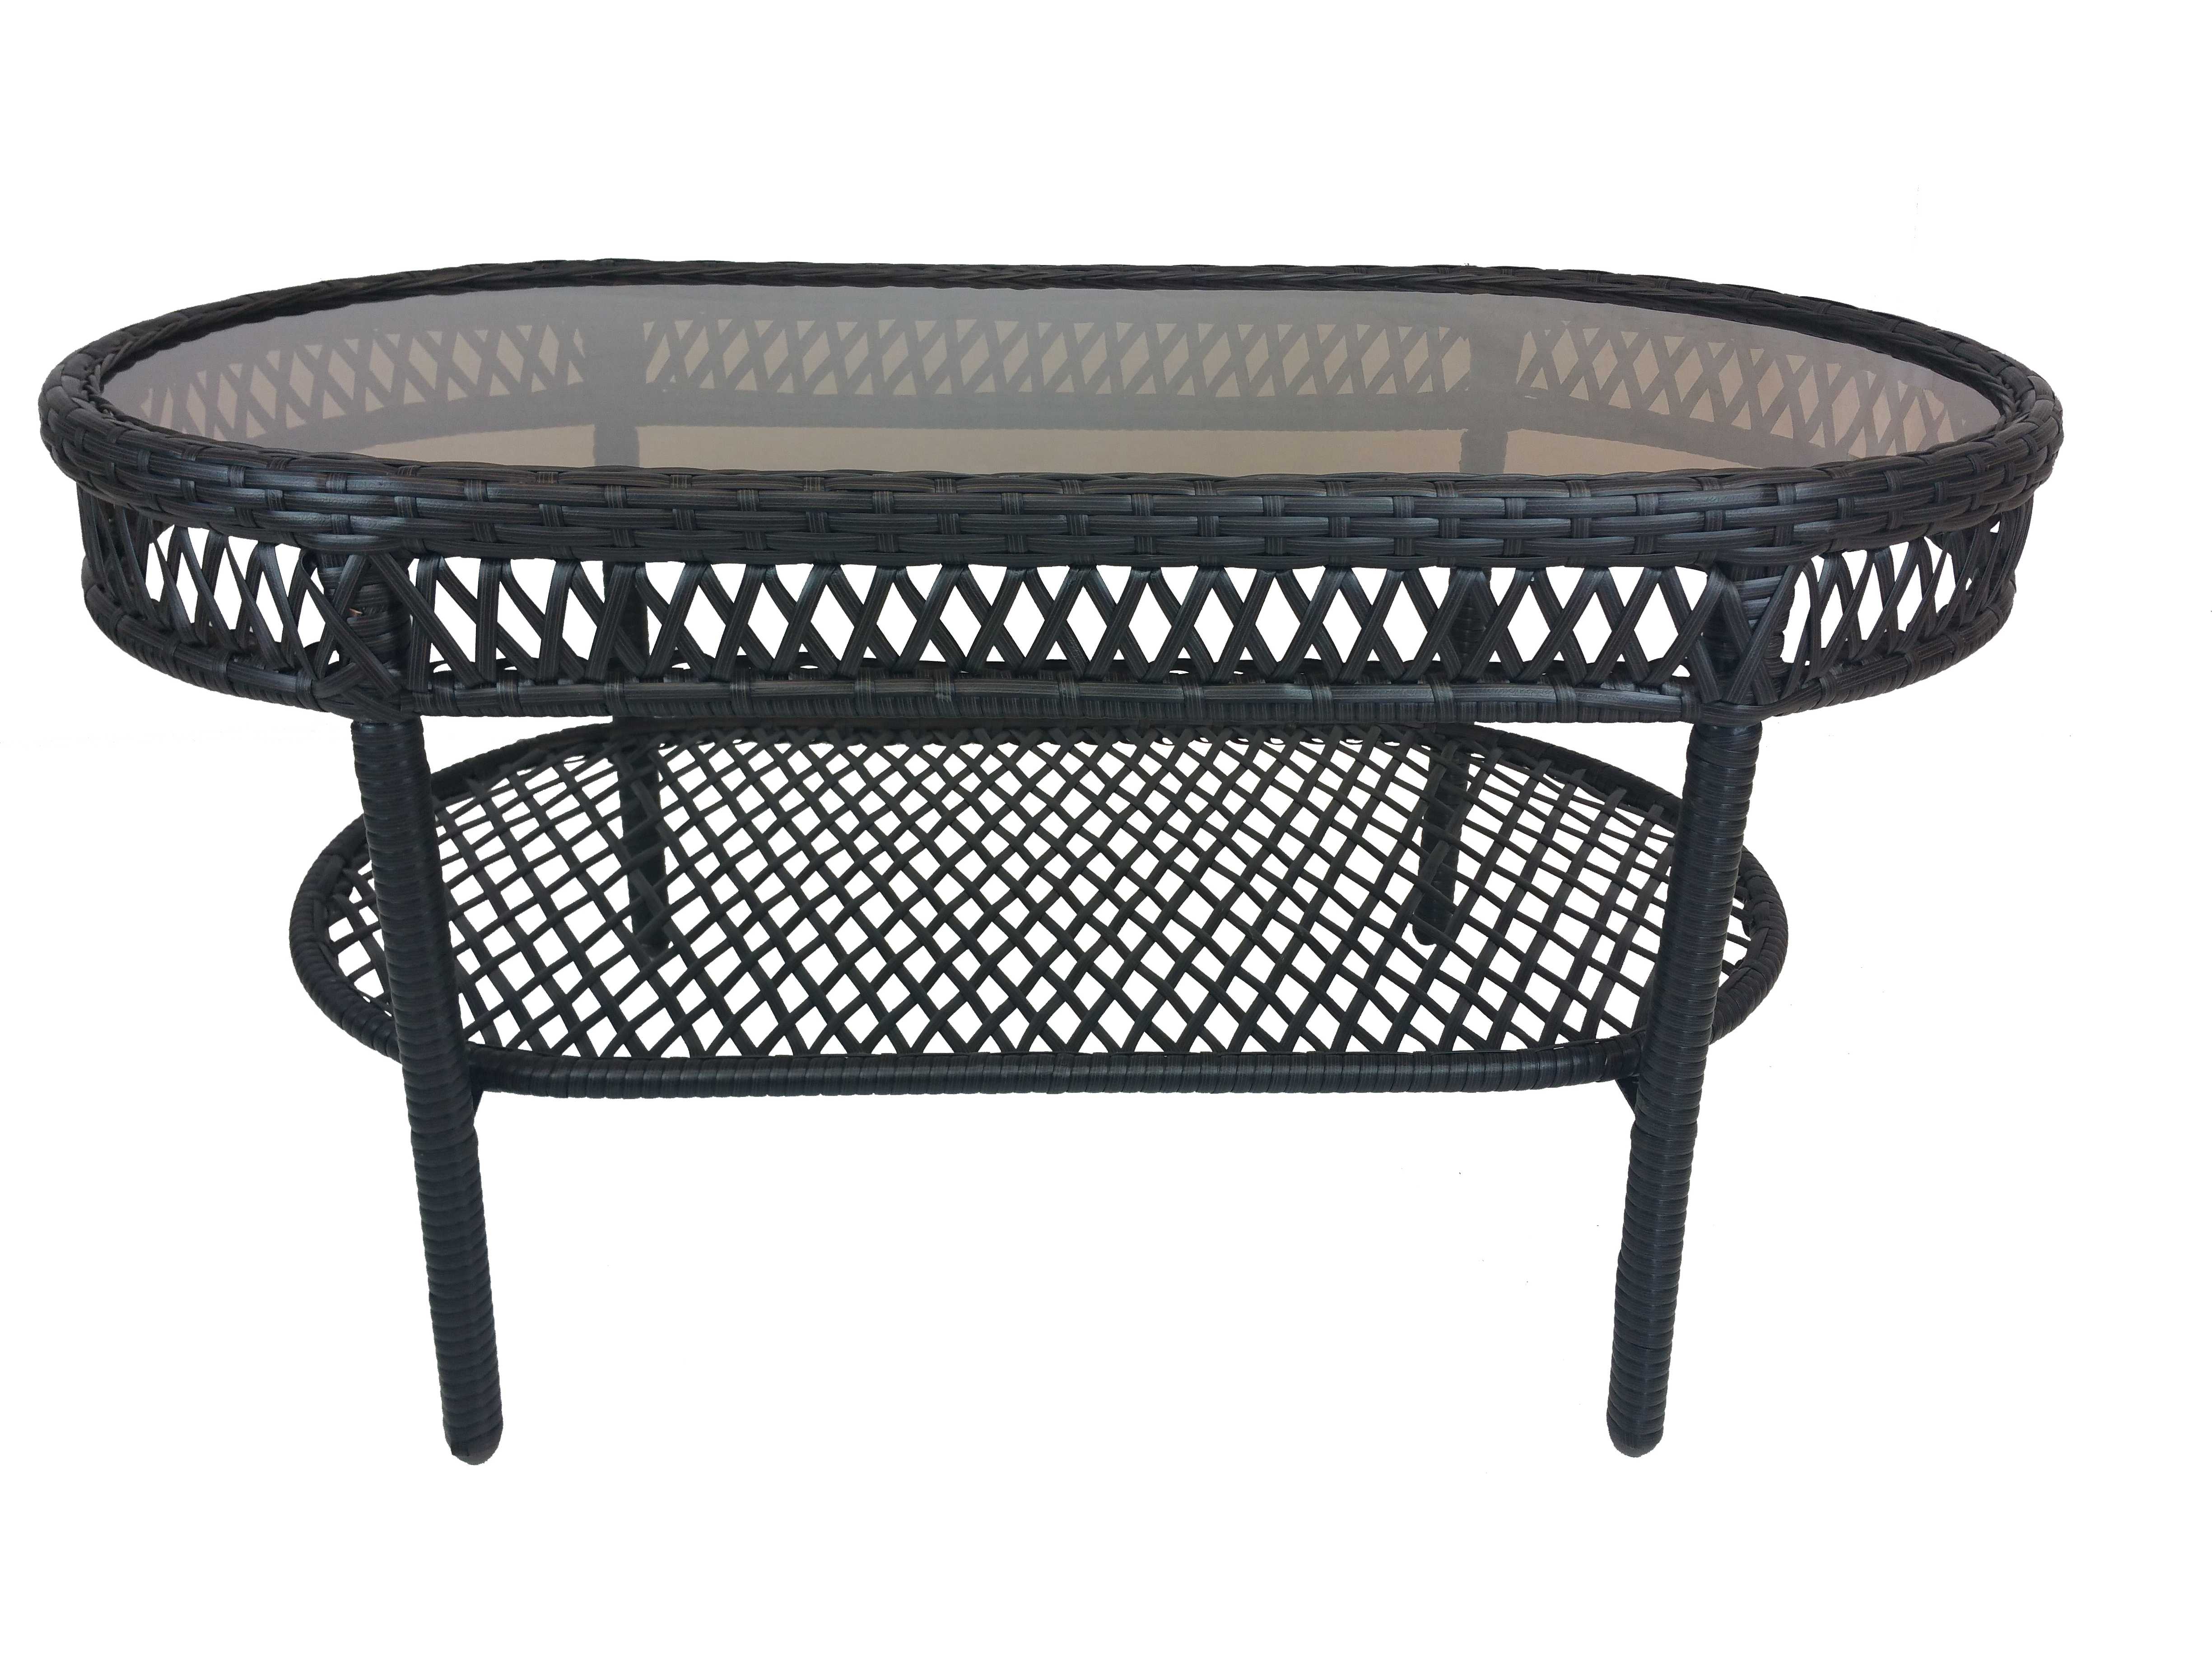 36 by 16-Inch Oakland Living Rochester Coffee Table